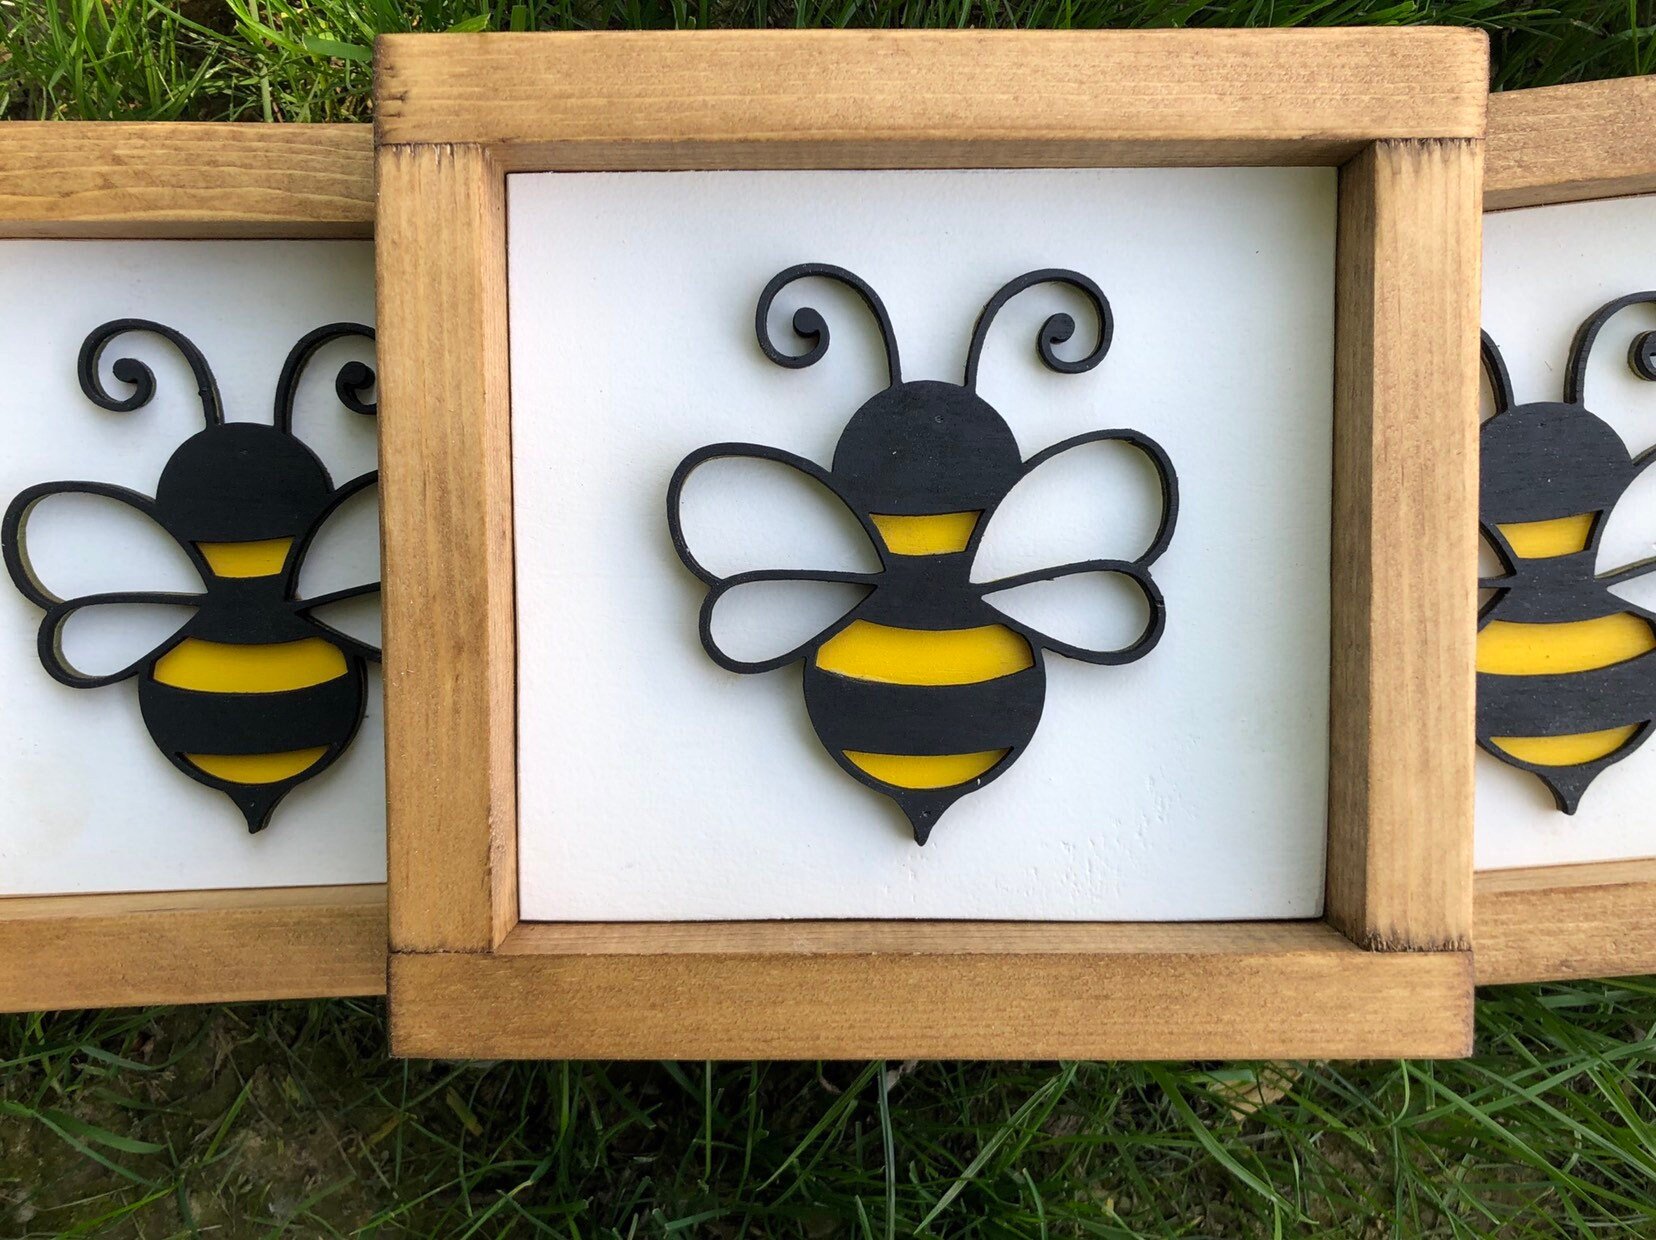 Bumble Bee Wood Signs. Farmhouse Decor. Tiered Tray Decor. 